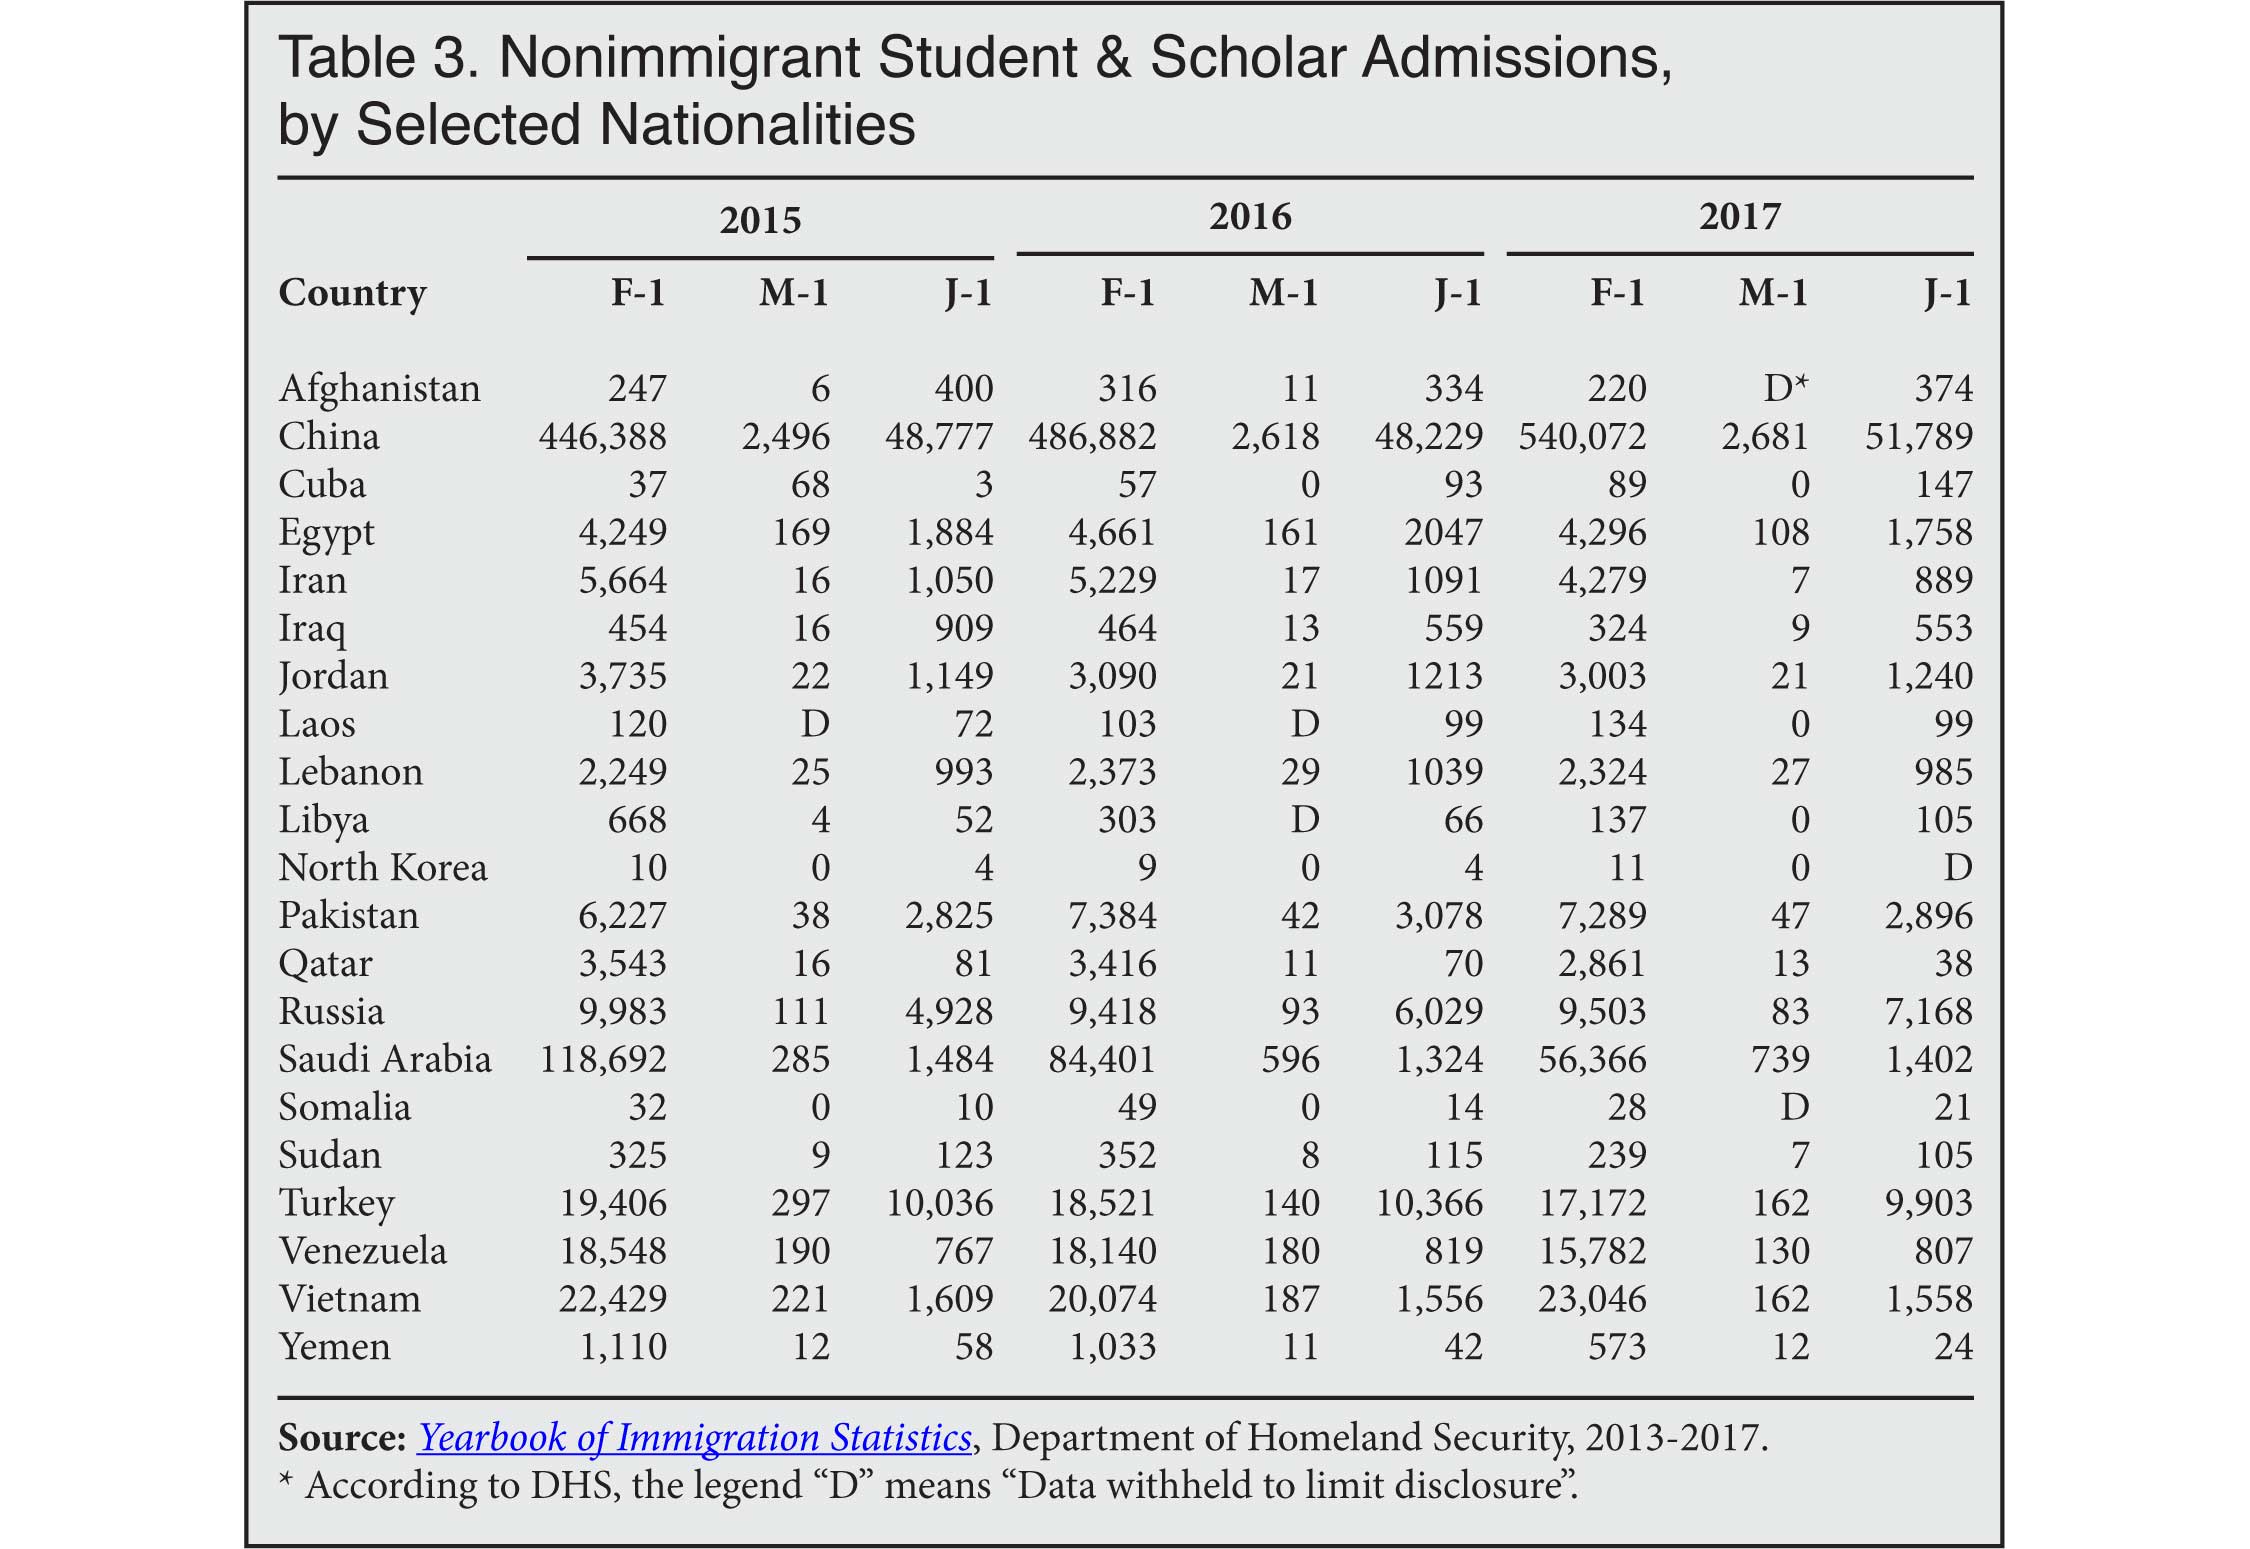 Table: Nonimmigrant Student and Scholar Admissions, by Select Nationalities